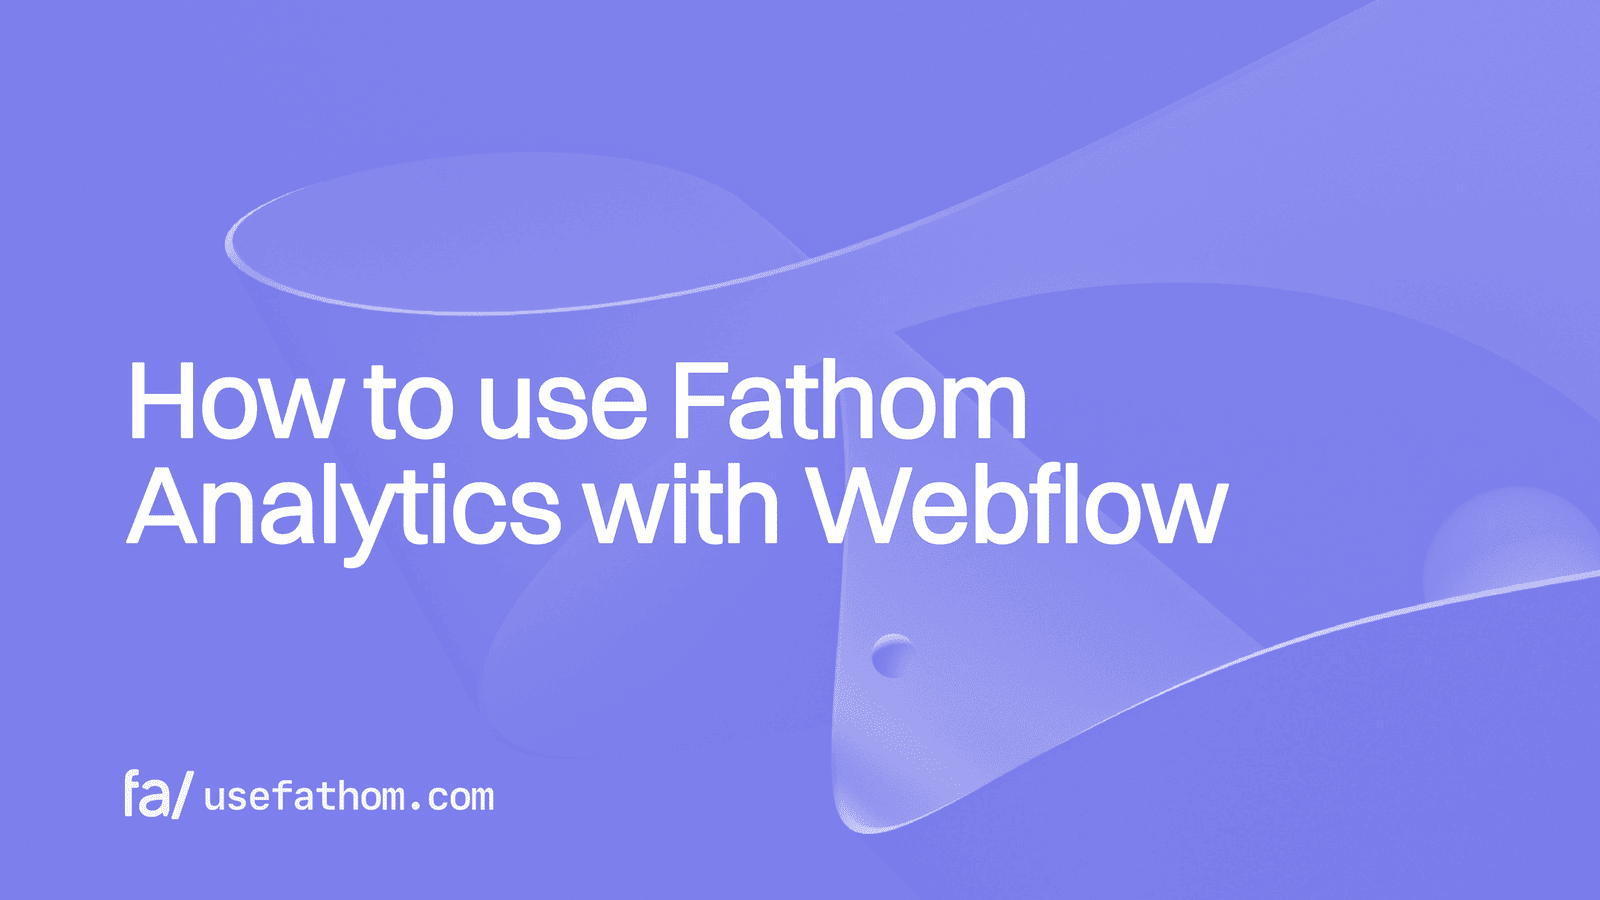 How to integrate Fathom Analytics with Webflow